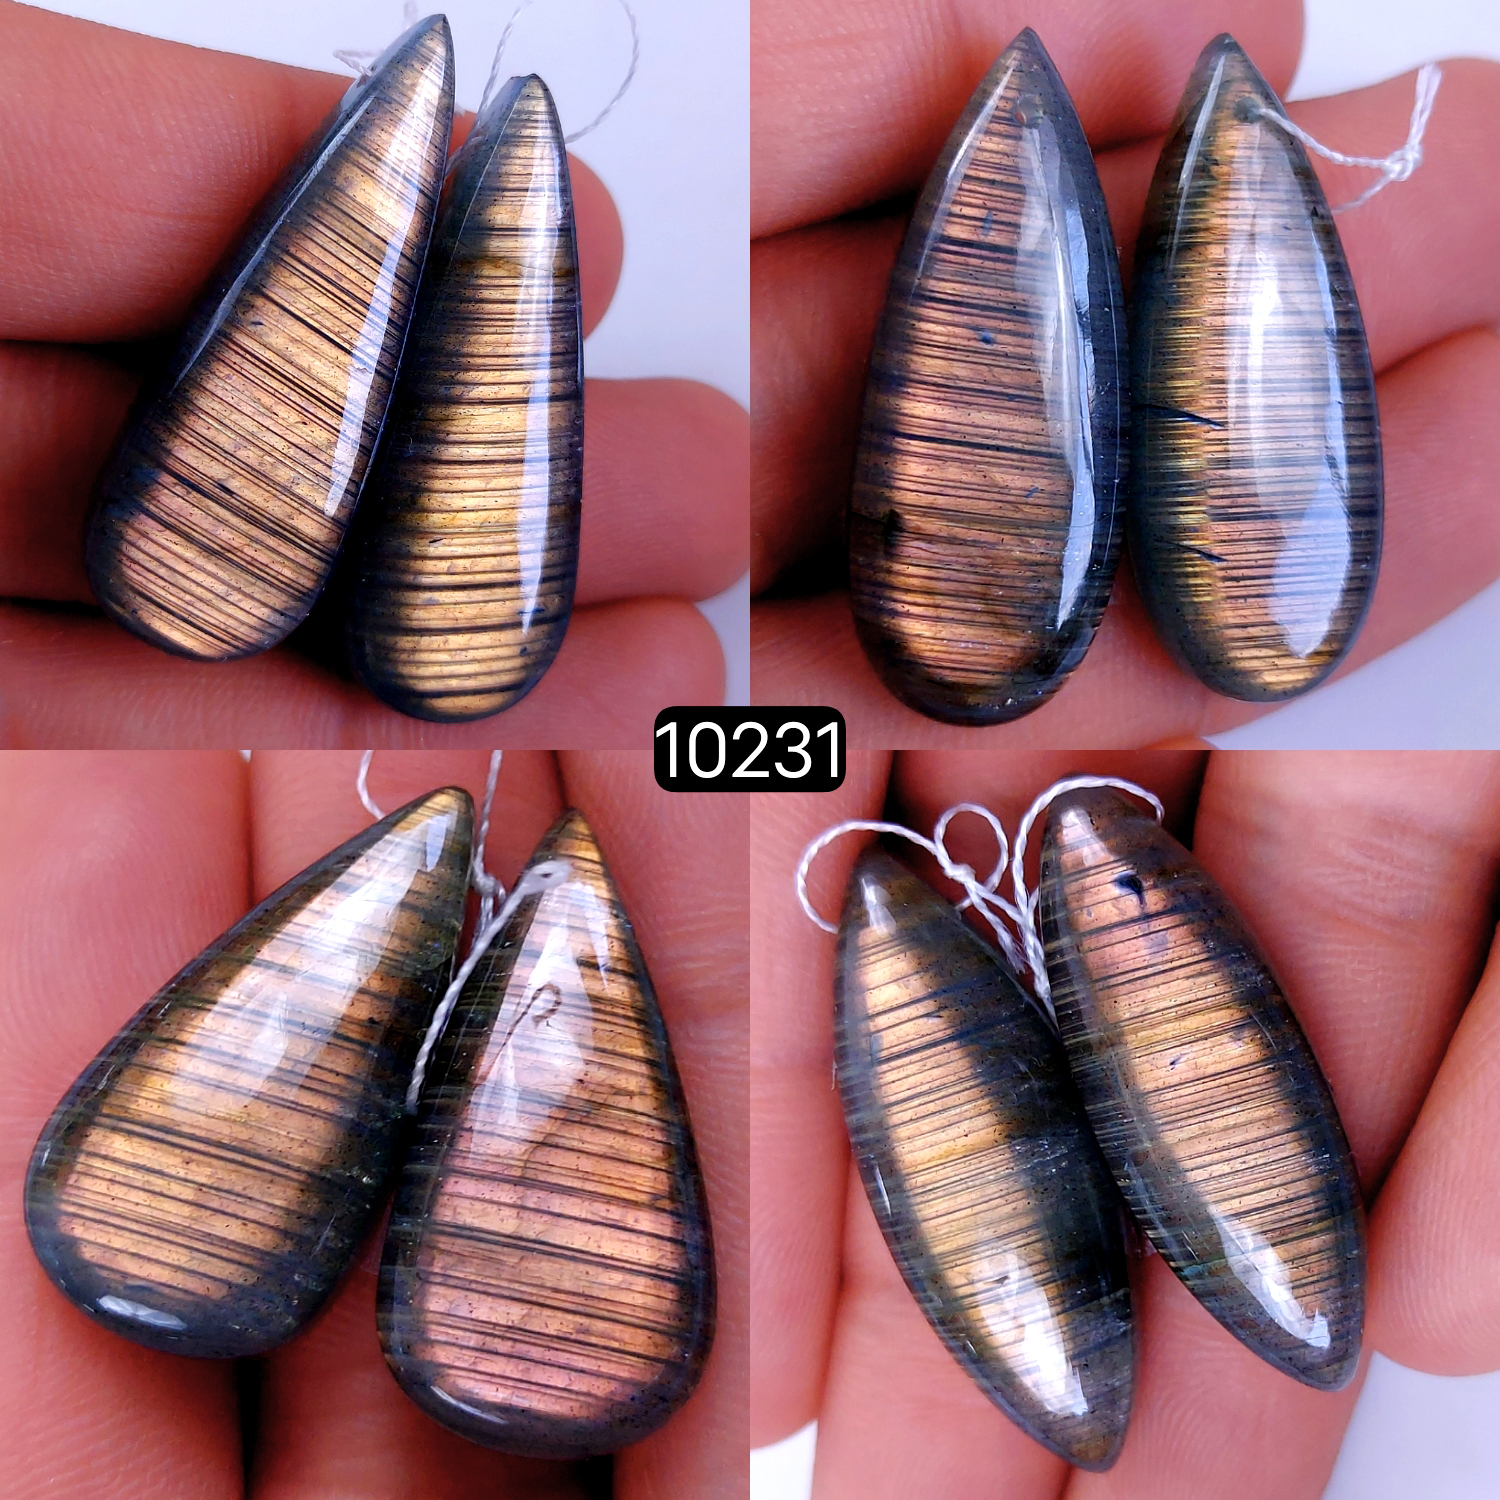 4Pair 200Cts Natural Labradorite Crystal Drill Dangle Drop Earring Pairs Silver Earrings Blue Labradorite Hoop Jewelry  38x14 30x15mm #10231